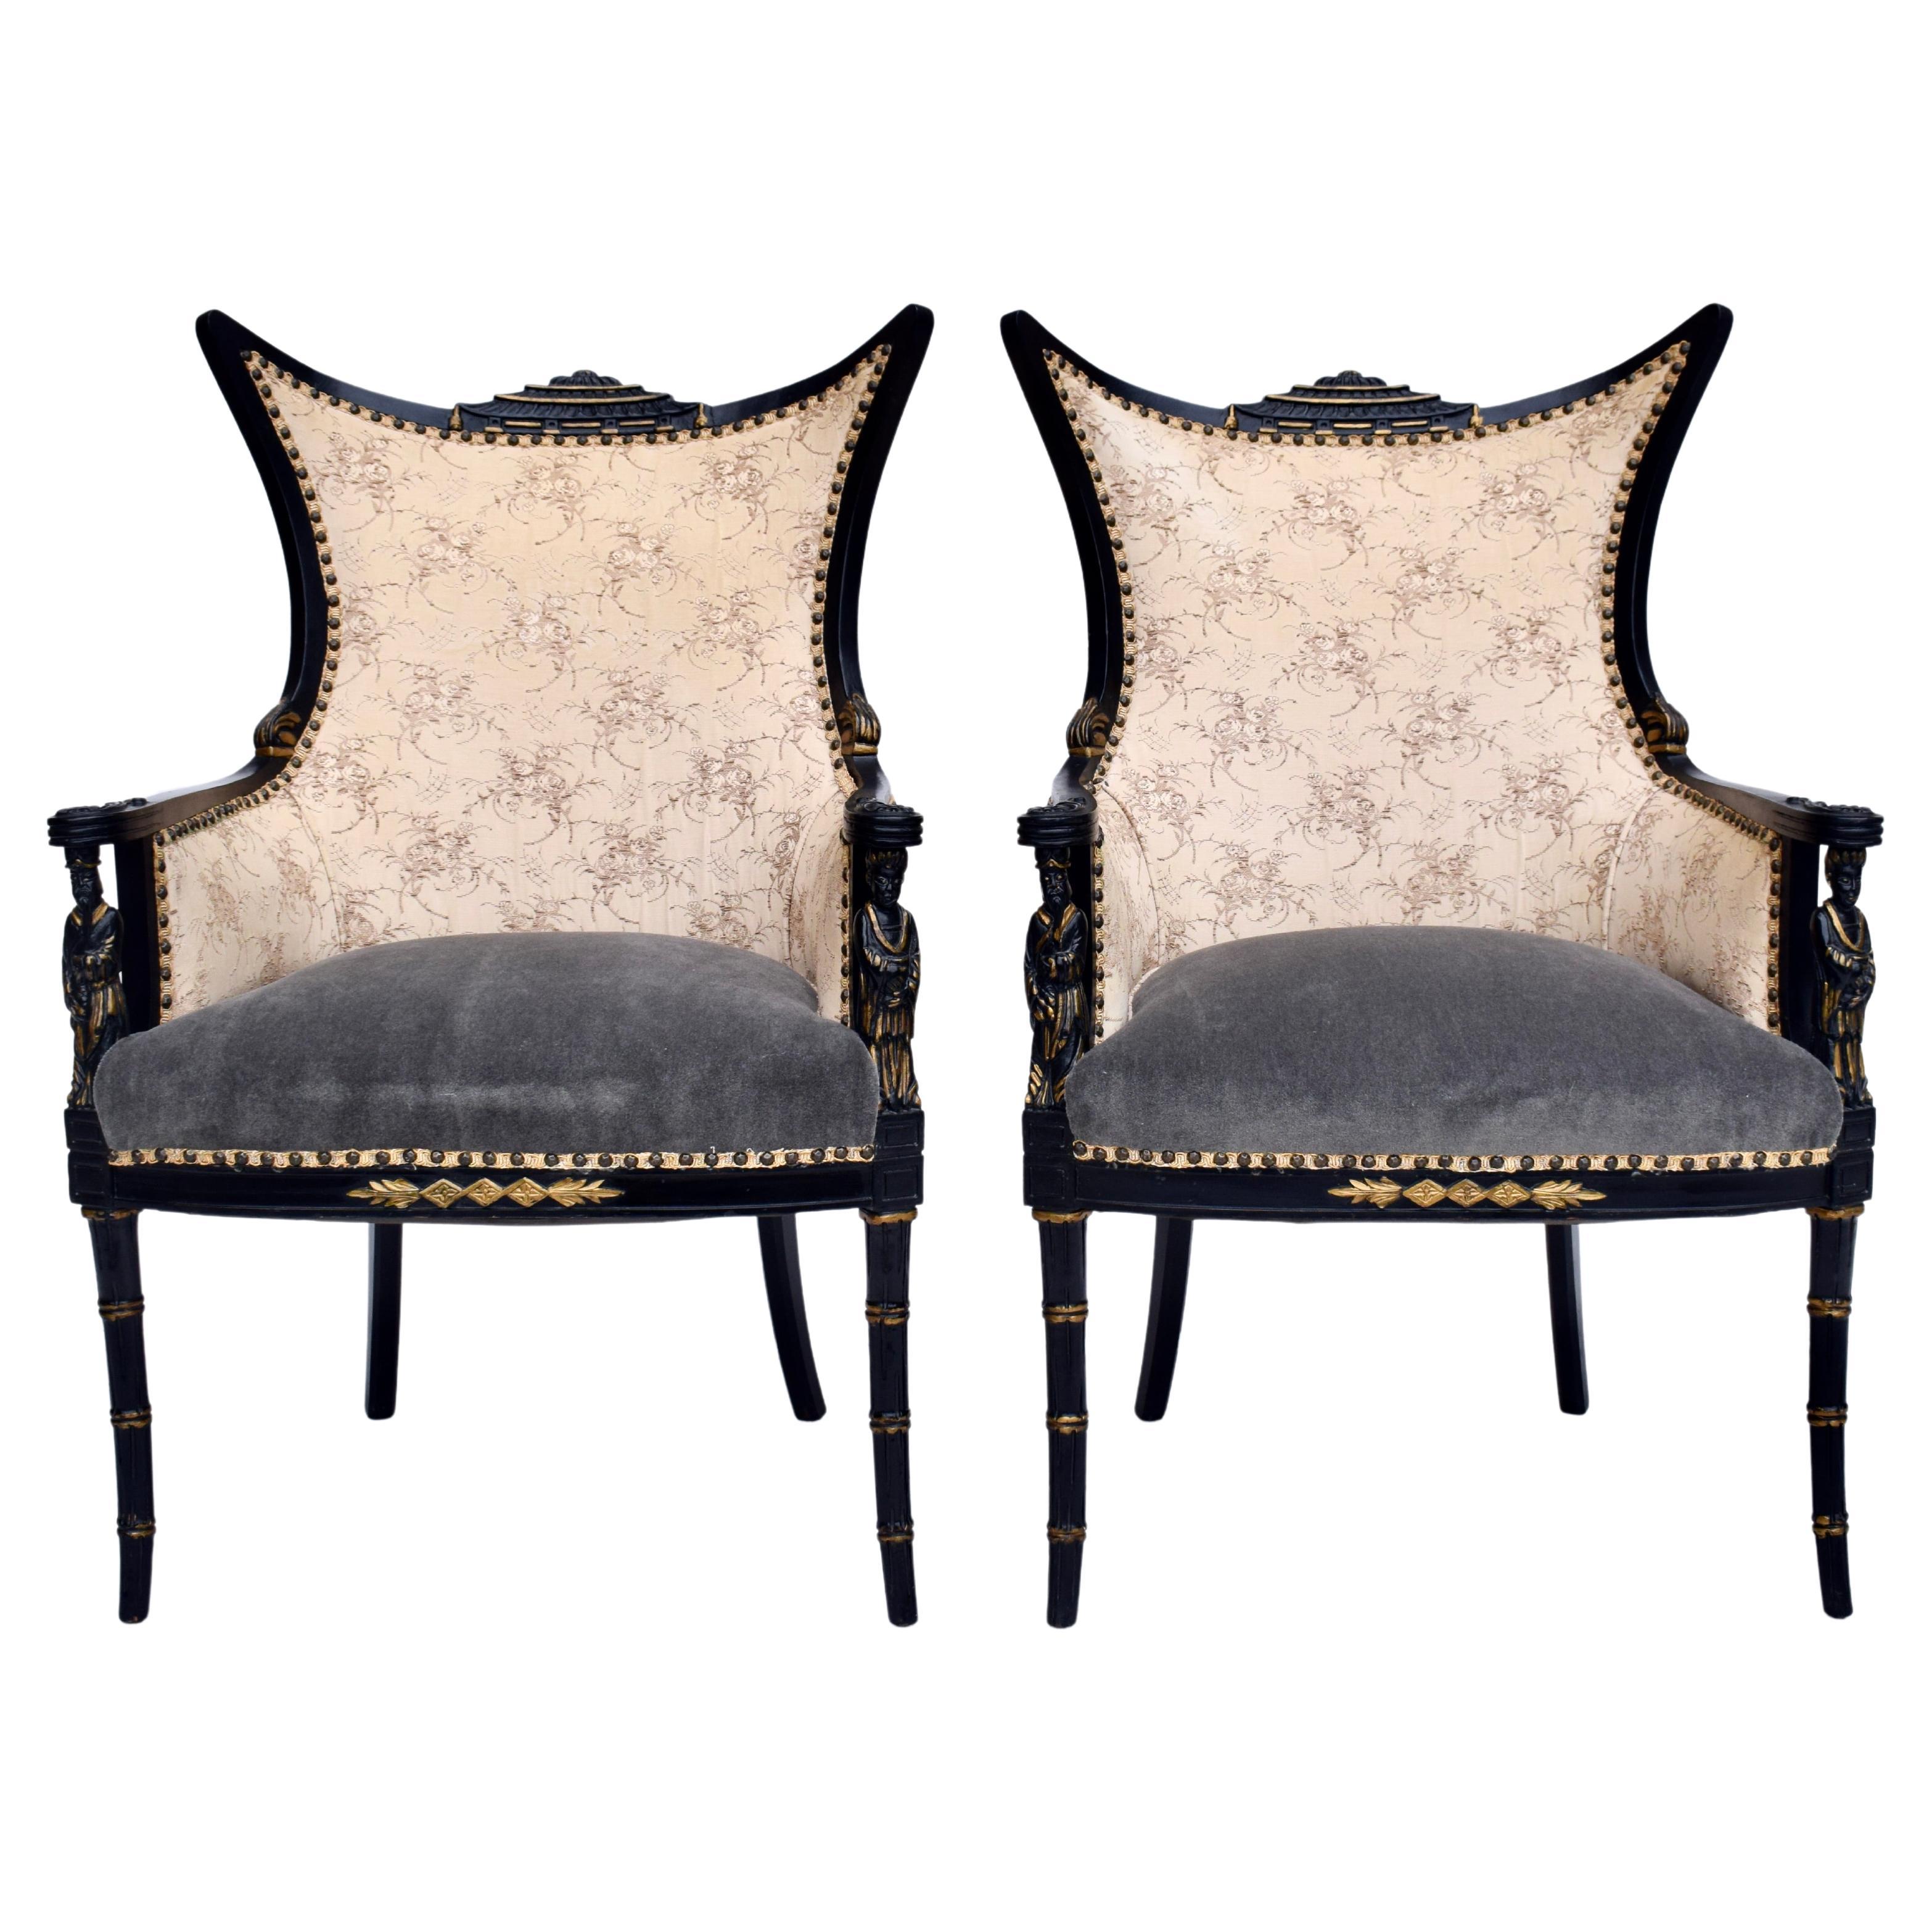 Vintage Chinoiserie Pagoda Arm Chairs For Sale